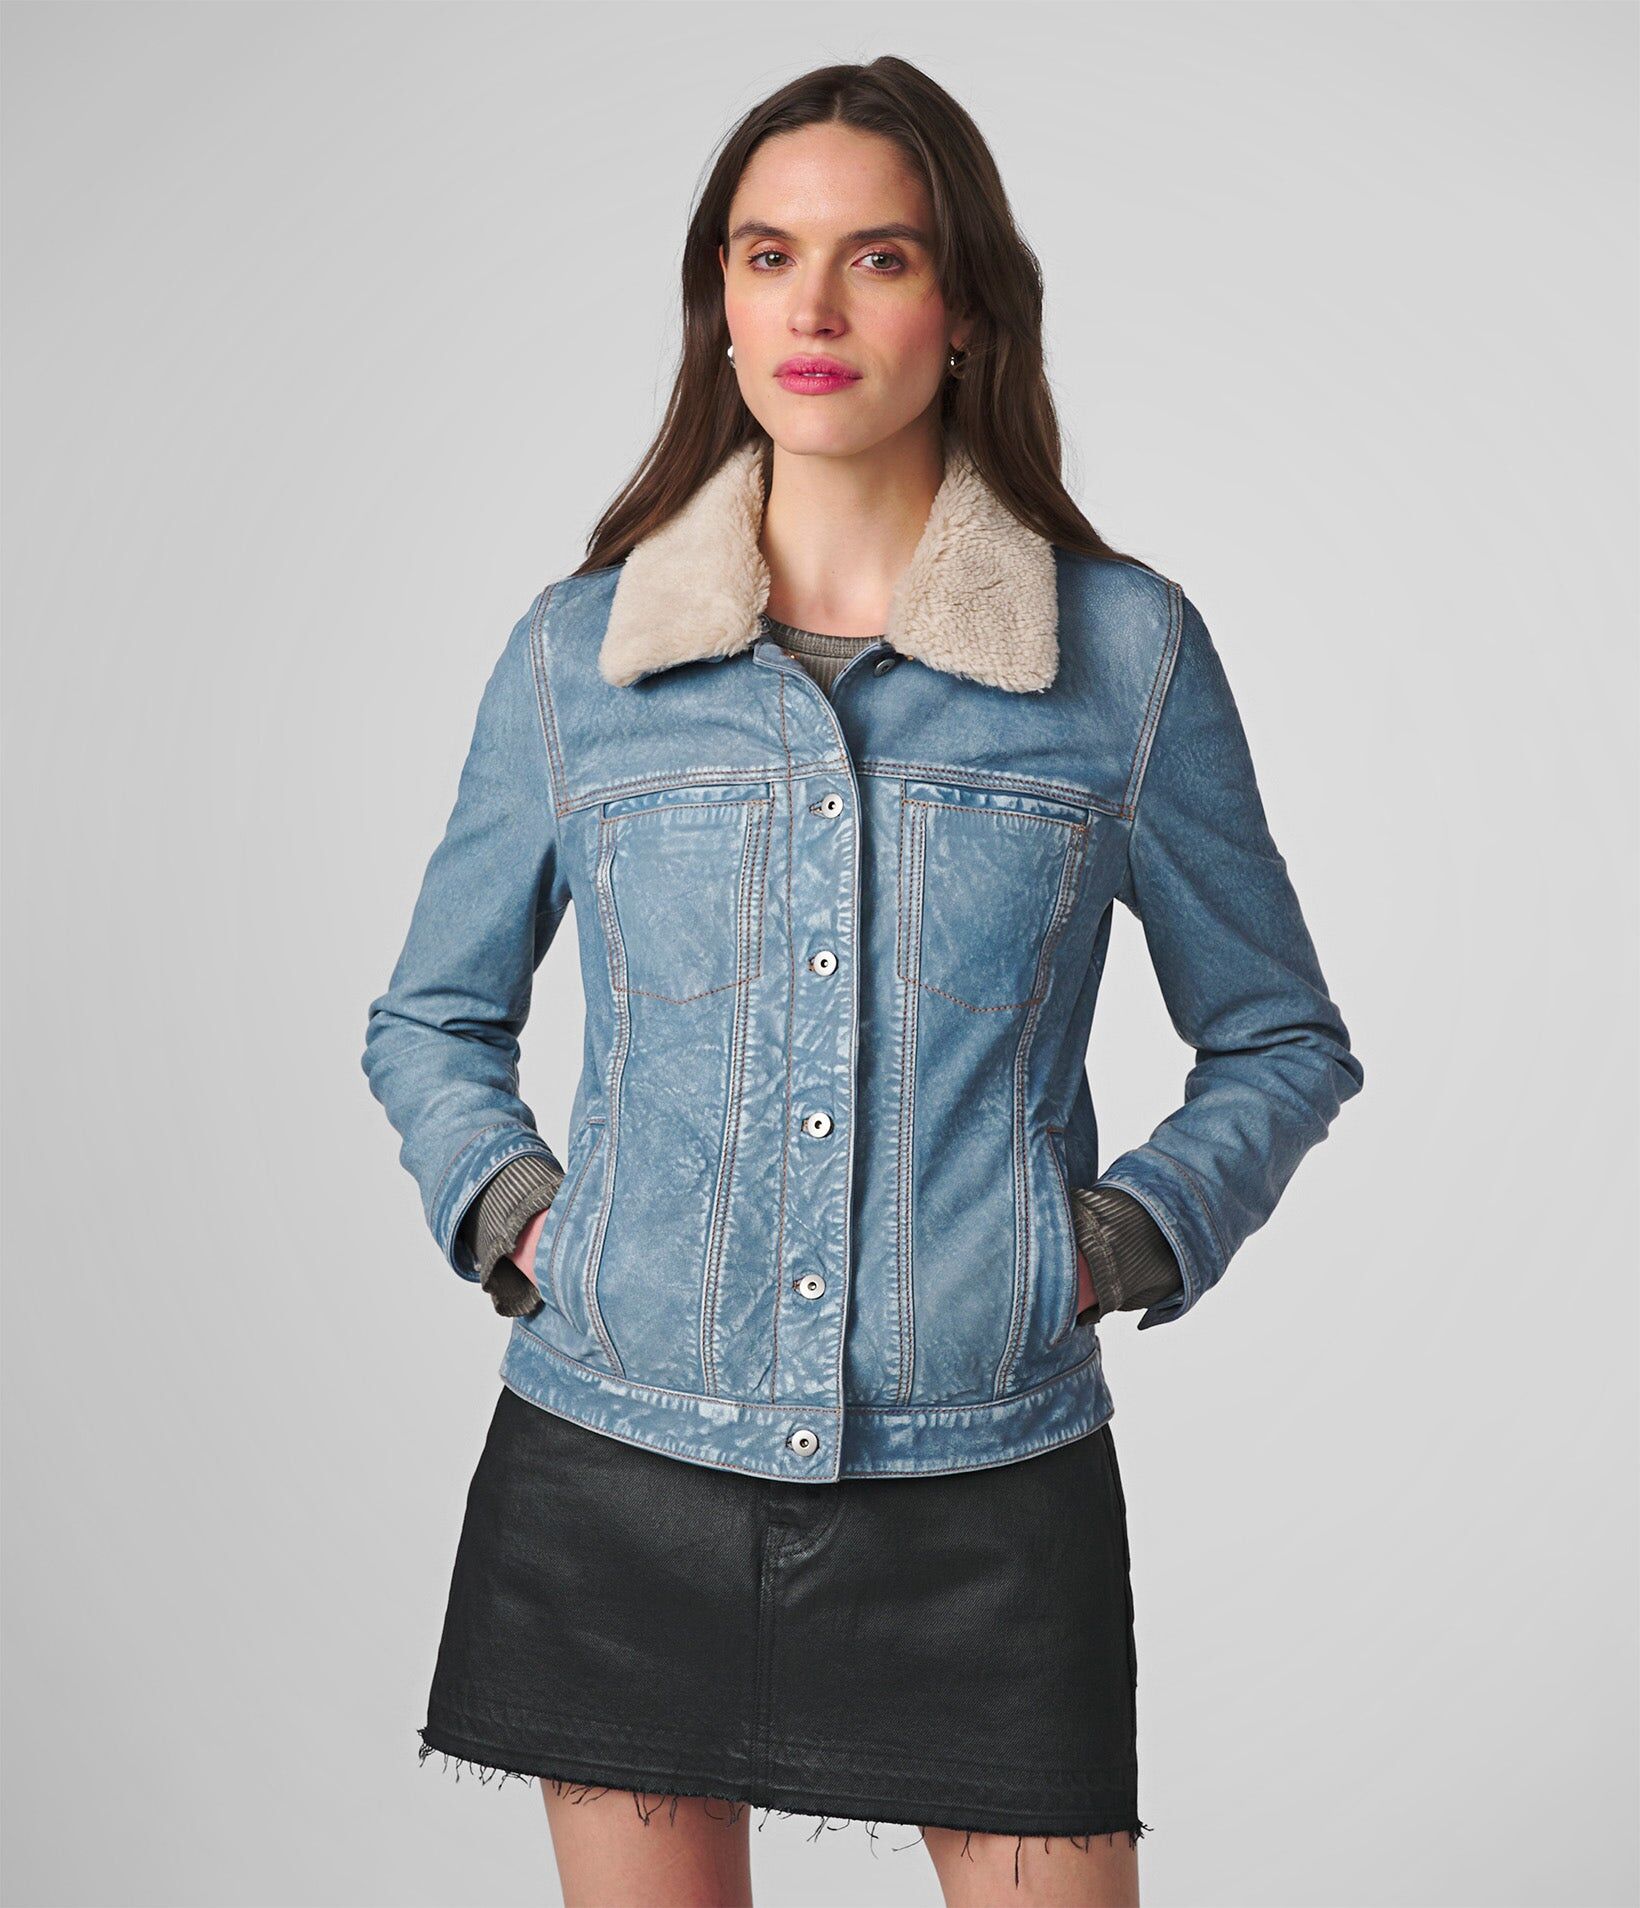 Wilsons Leather   Women's Harley Denim Leather Jacket With Shearling Collar   Light Blue   Medium